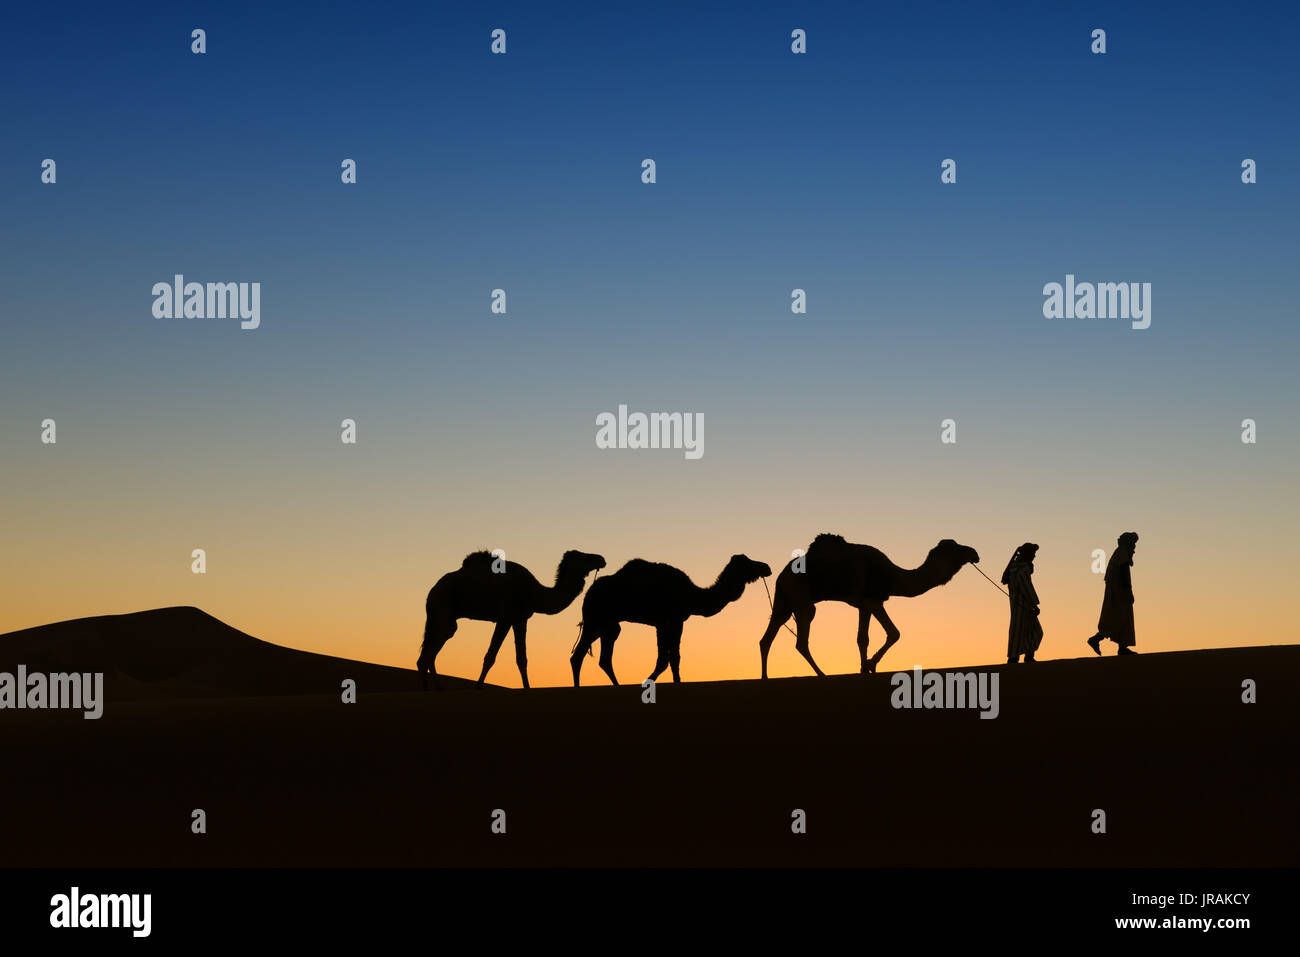 Camel (dromedary) caravan with nomads in the desert at sunrise. Stock Photo